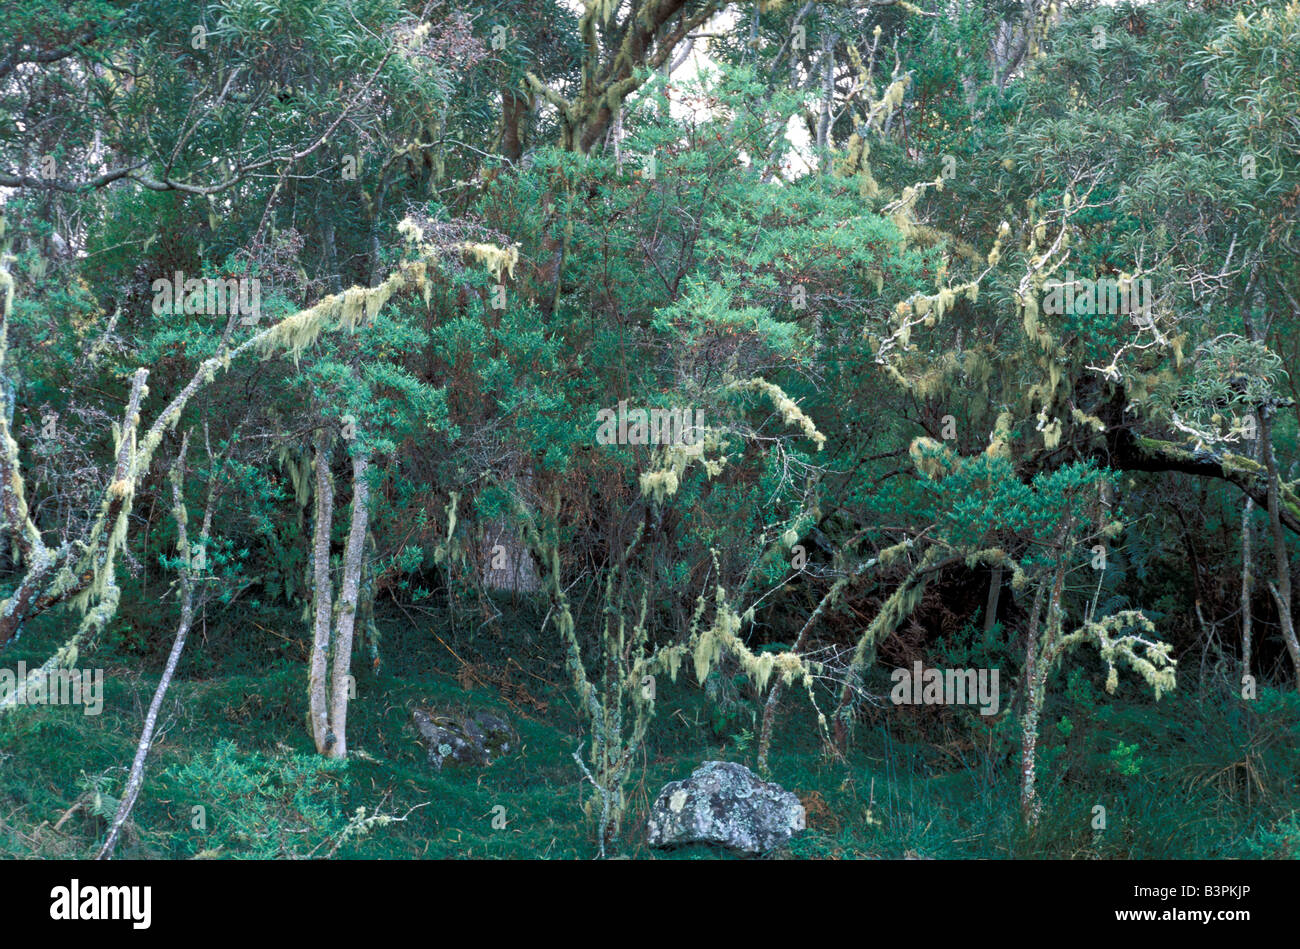 Lichens on trees, Rain forest, Reunion island, Indian Ocean, Africa Stock Photo